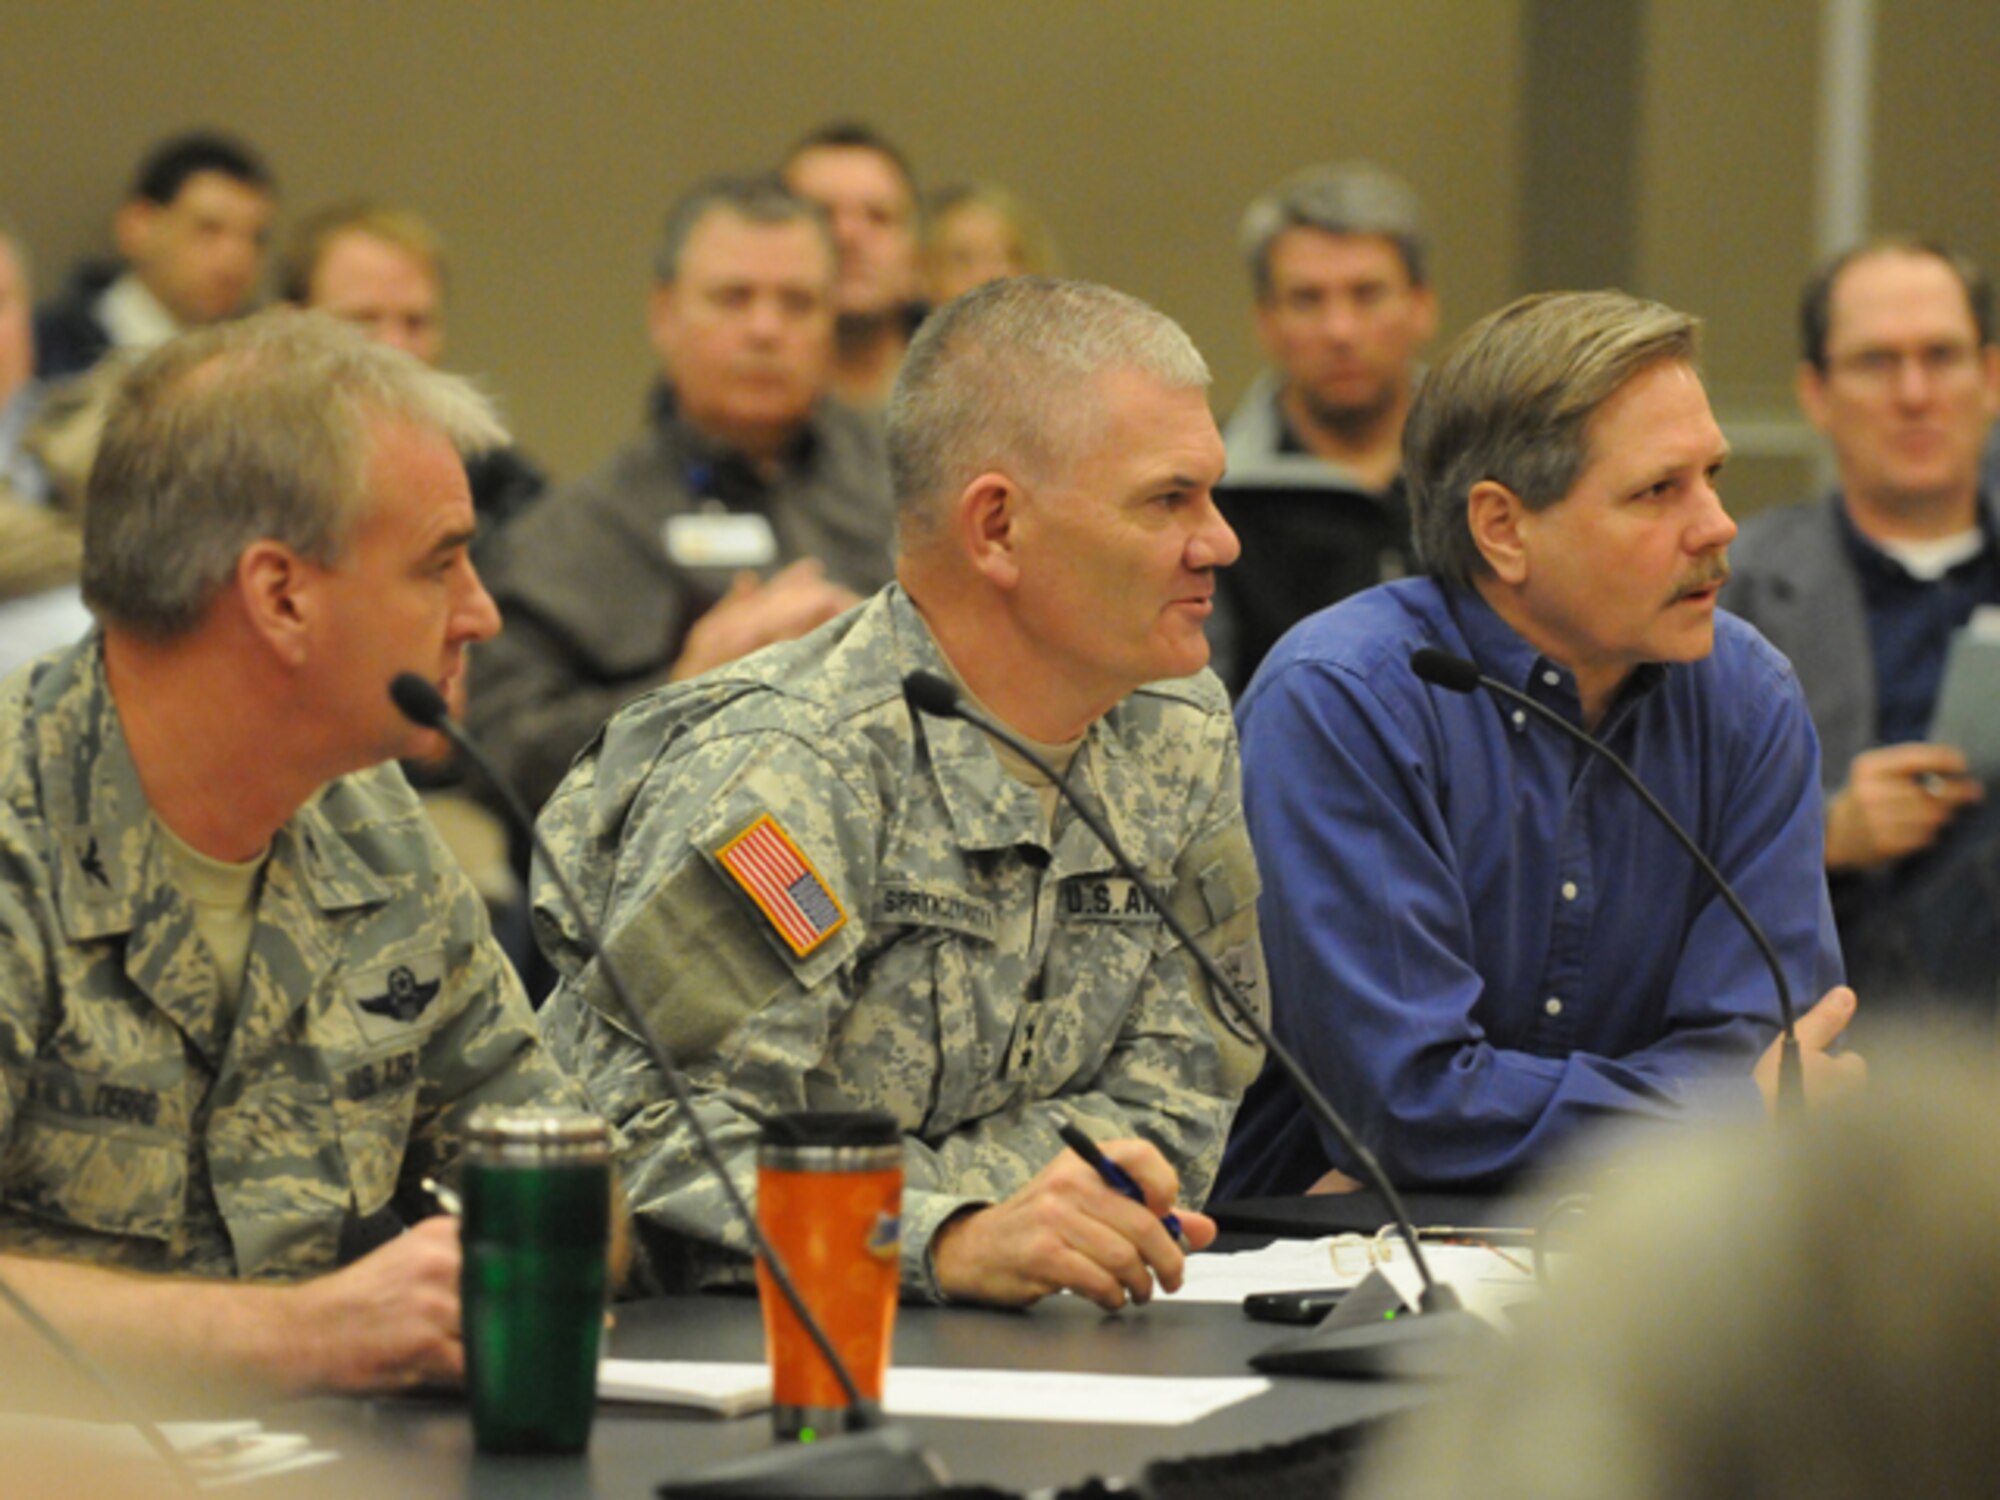 Maj. Gen. David Sprynczynatyk, the North Dakota adjutant general, speaks to community officials March 16 at the Fargo, N.D., City Hall. He is addressing National Guard assistance with flood fighting activities, as Col. Brad Derrig, of the 119th Wing, left, and N.D. Gov. John Hoeven, right, listen.  (DoD photo by Senior Master Sgt. David H. Lipp) (Released)

